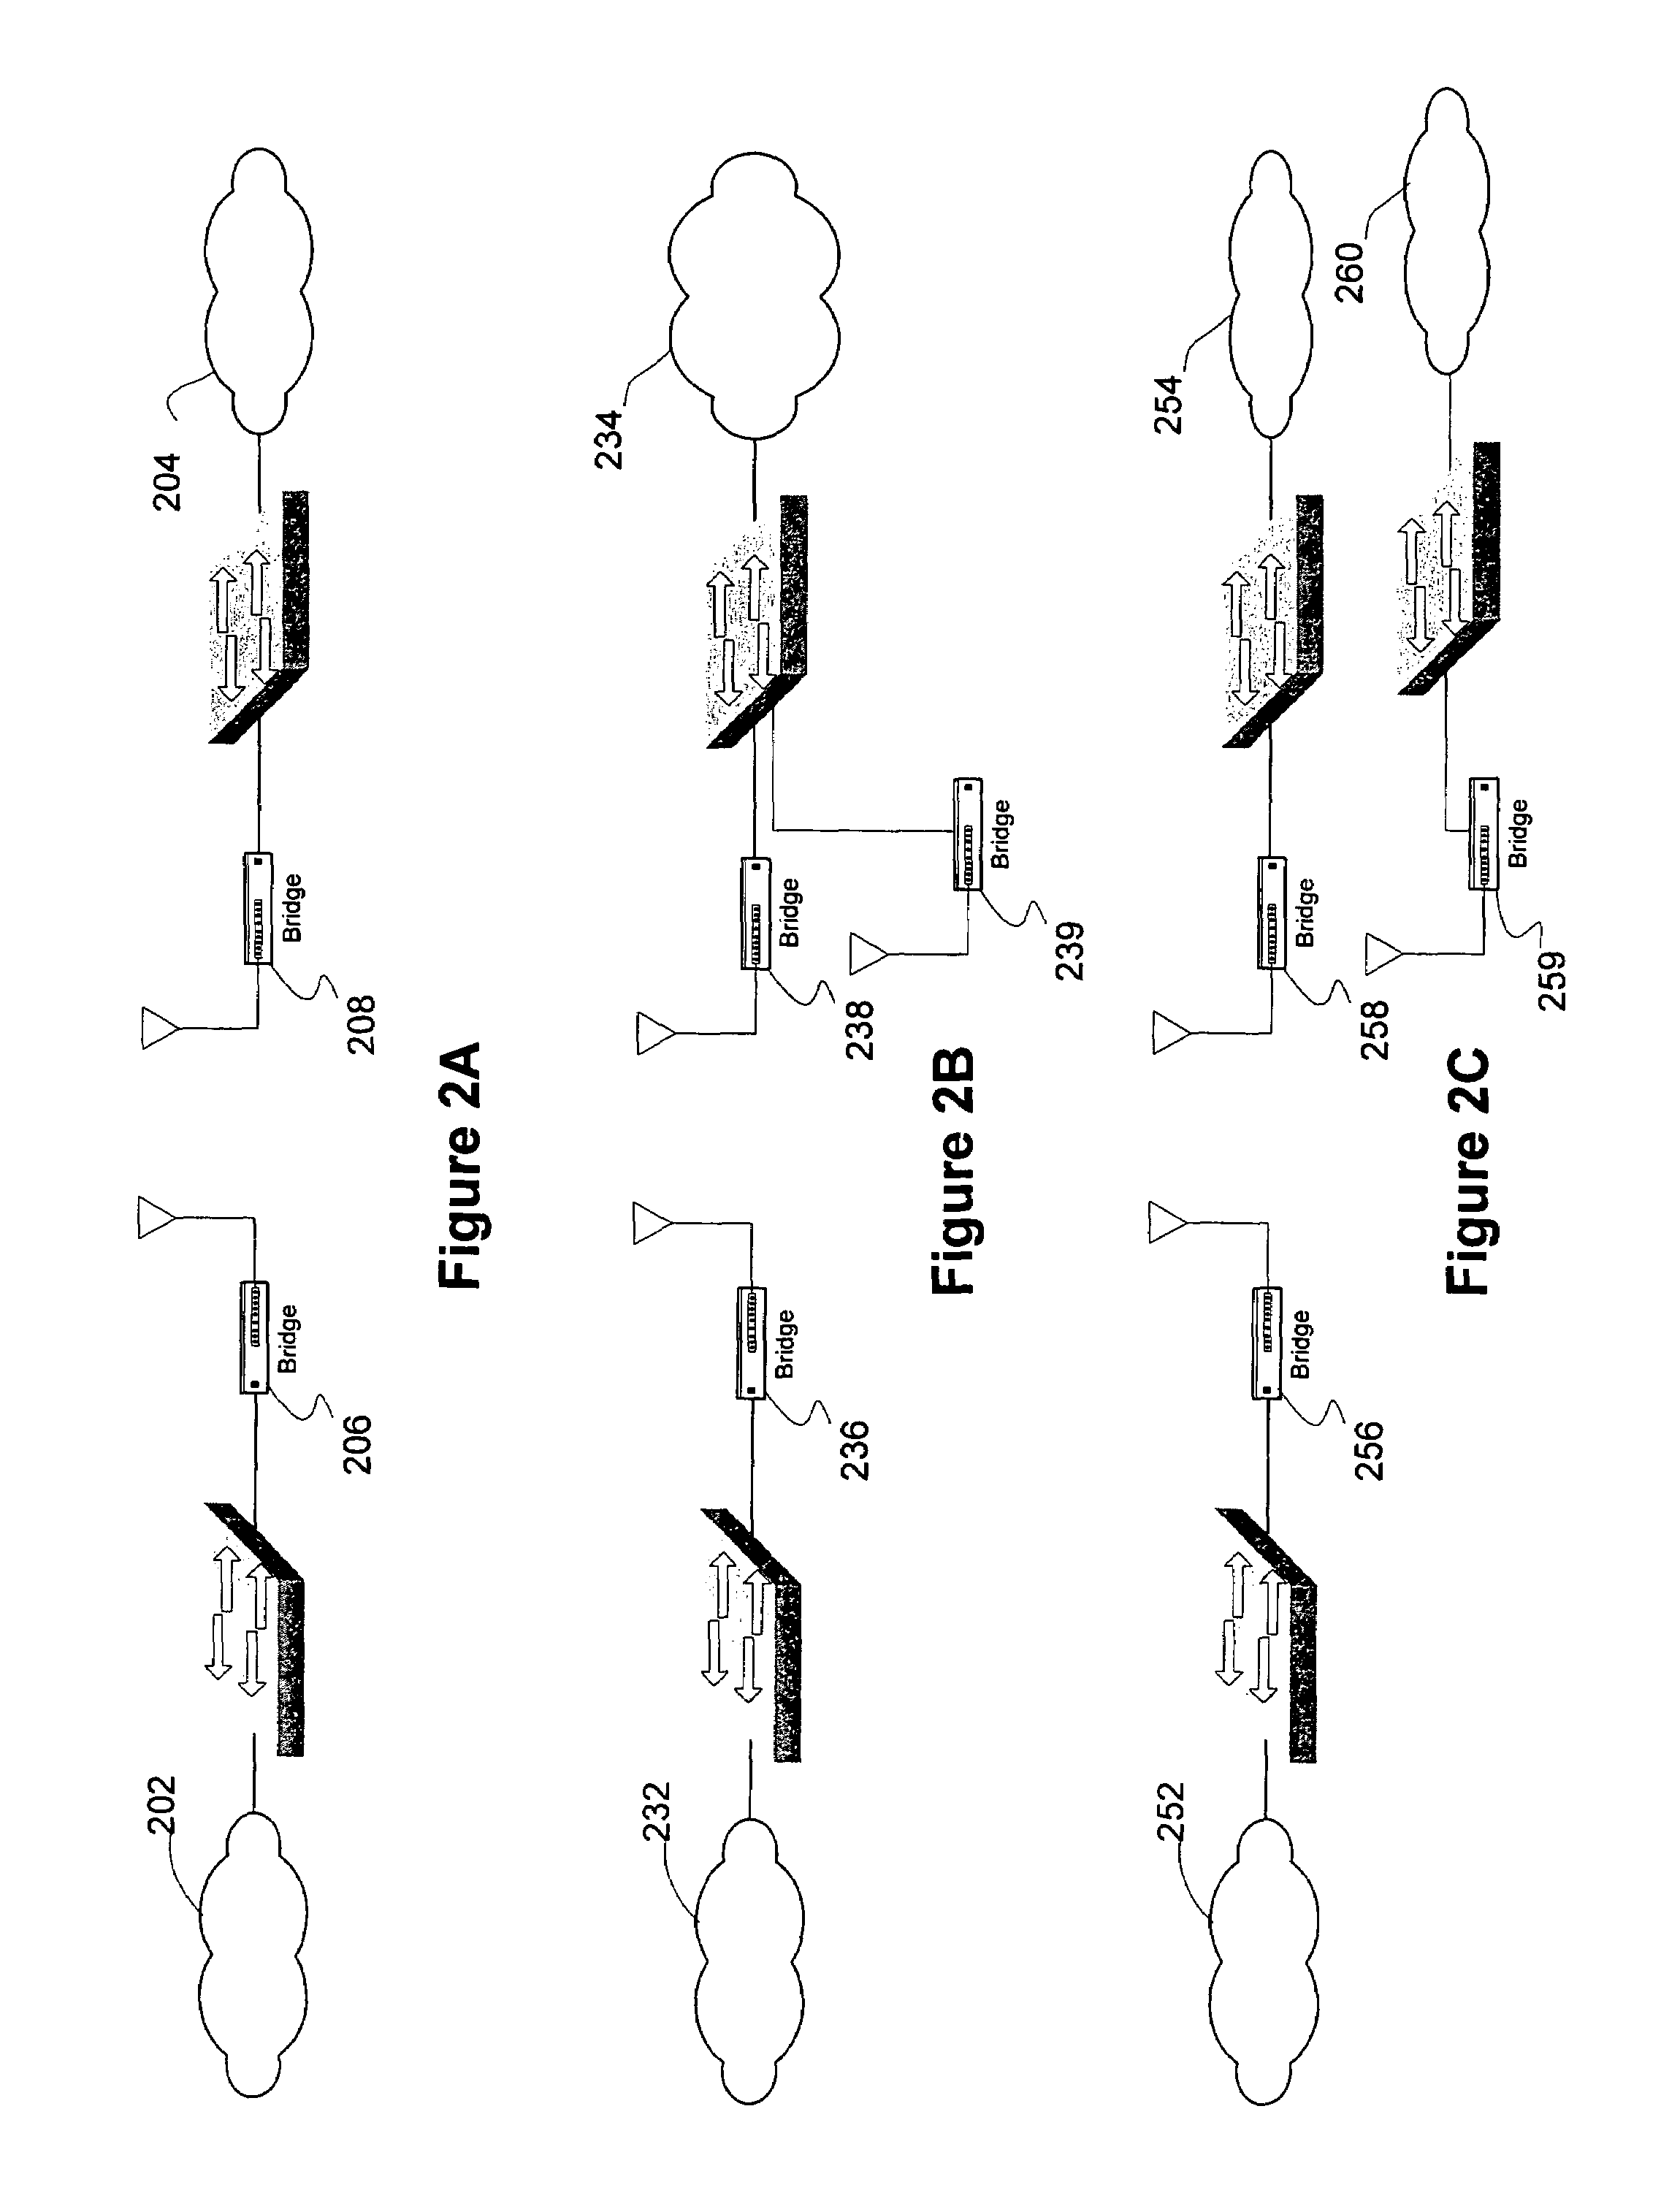 Automatic installation and alignment mode for wireless bridges